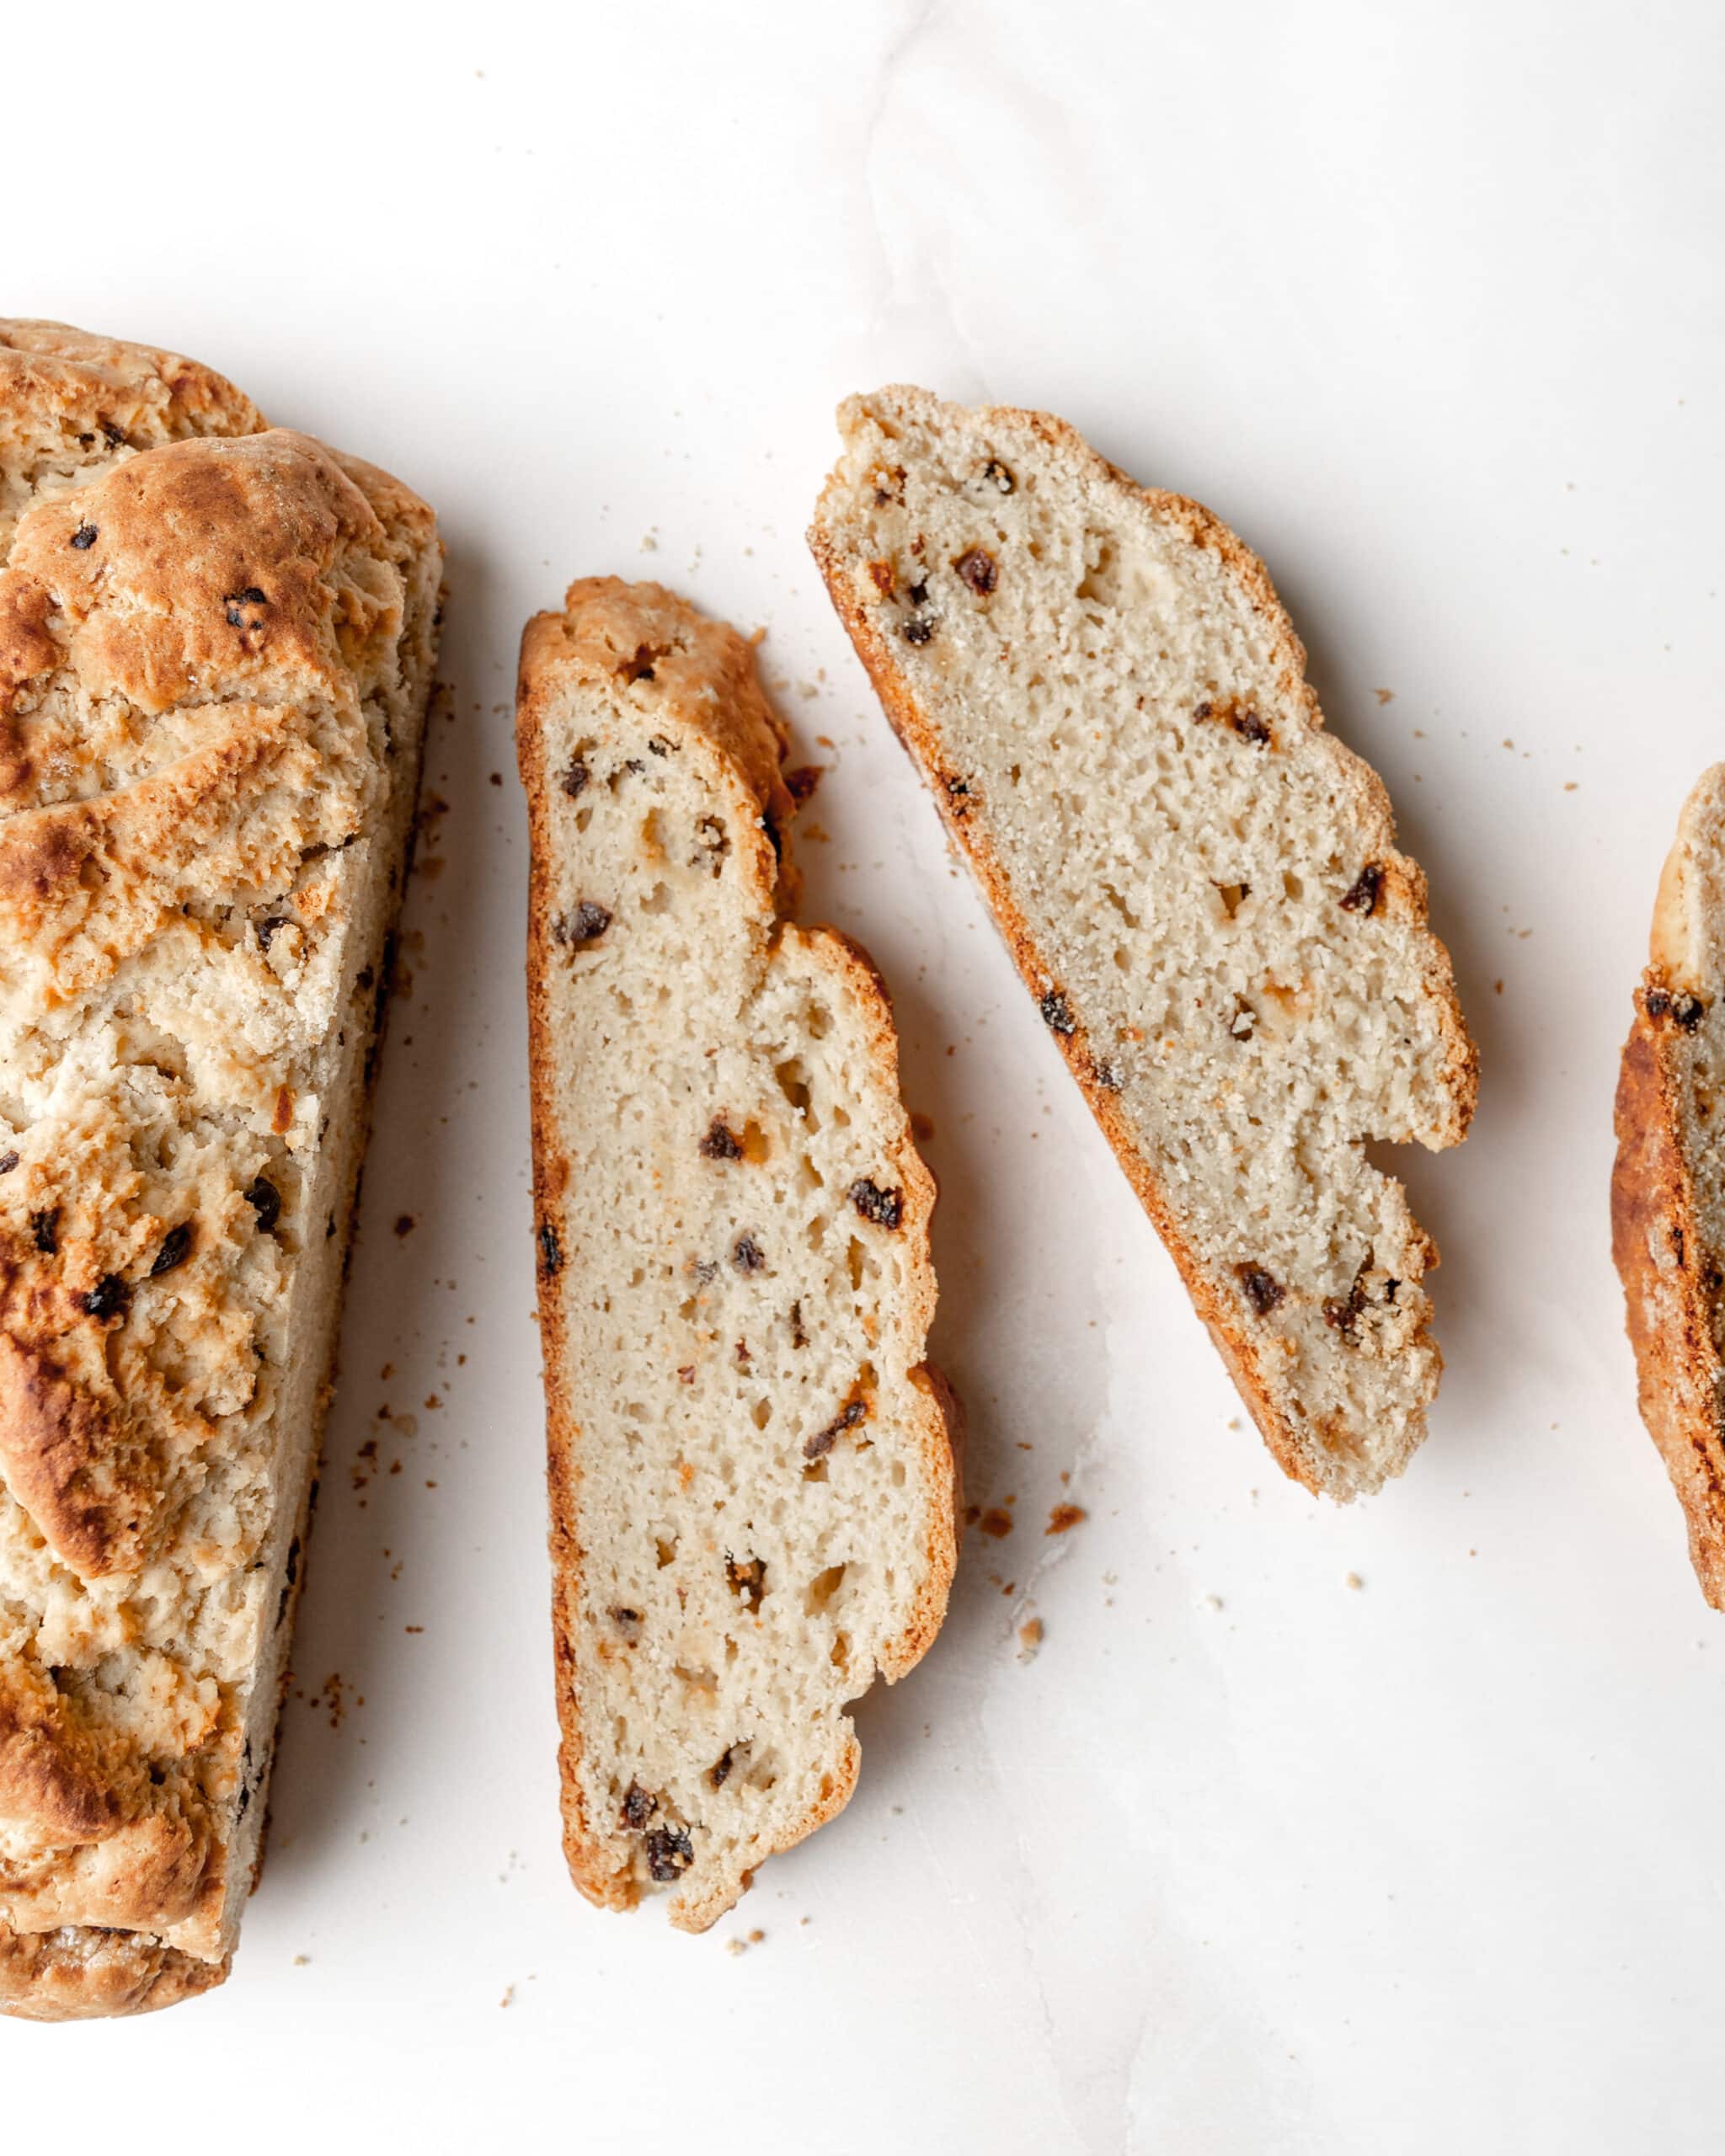 An overhead view of soda bread cut into three slices with currants.